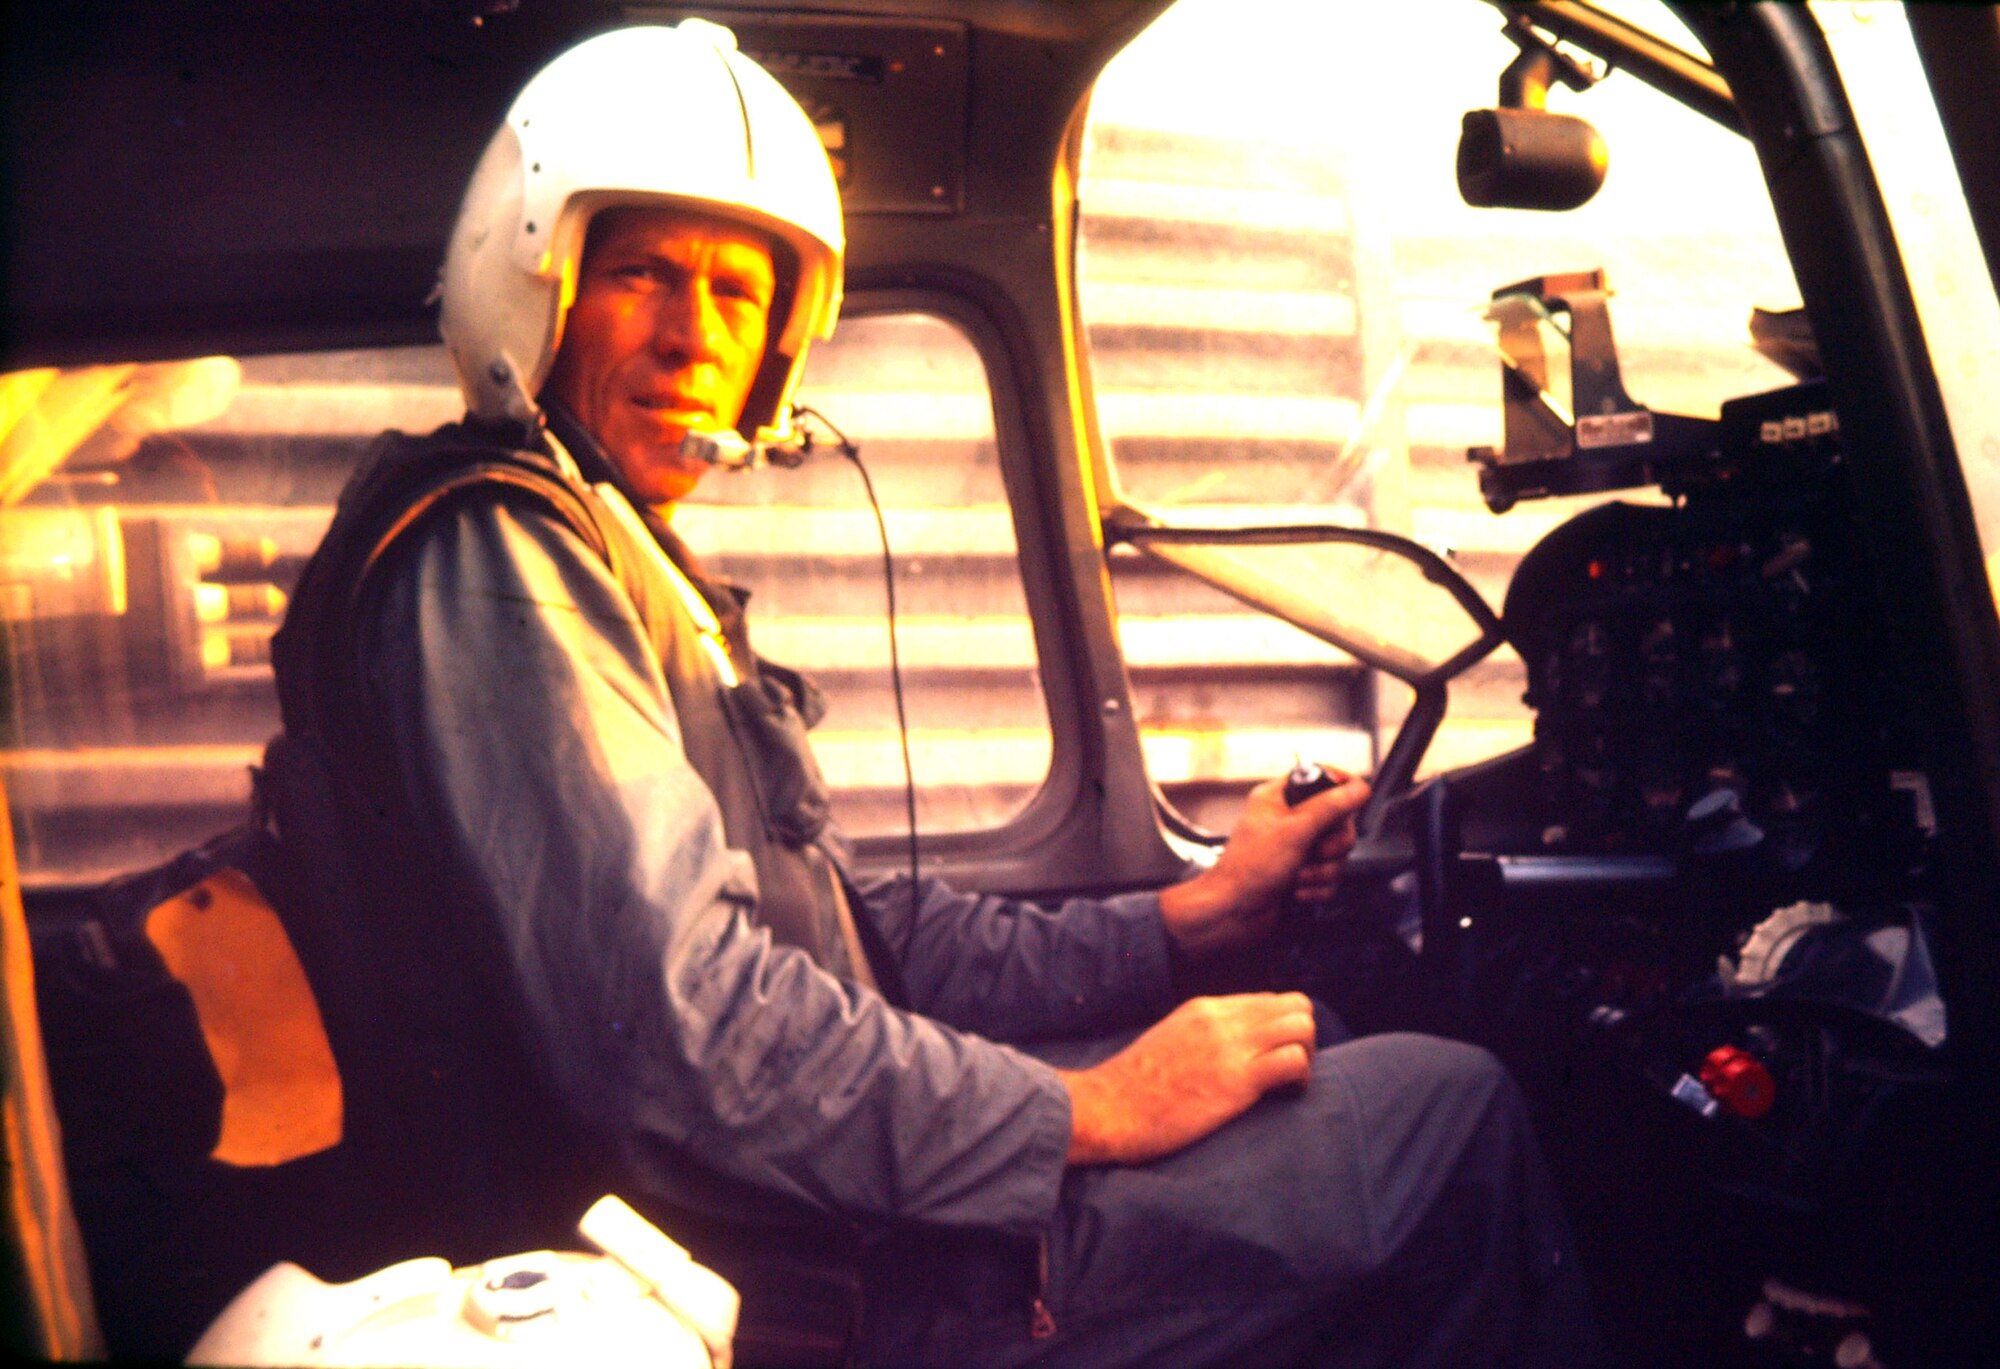 Maj. Robert F. Woods sits in the pilot seat of an 02-A Skymaster in Vietnam in 1968.  On June 26, 1968, Major Woods disappeared in the Quang Binh Province in Vietnam after the 02-A Skymaster he was flying crashed in a remote mountainous region.  A native of Salt Lake City, Utah, Major Woods was in the military for 20 years when he disappeared. His career began in June 1948 as an enlisted aircrew member on a C-74 Globemaster in the Berlin Airlift.  In 1951 he became an officer and a pilot flying KC-97 Stratotankers in the Korean Conflict.  In Vietnam, he served as a forward air controller in the Skymaster with the 20th Tactical Air Support Squadron in DaNang Air Base, South Vietnam. He earned his first of eight Air Medals in Korea and also earned the Distinguished Flying Cross and Bronze Star for his service in Vietnam.  On April 9, 2008, he was laid to rest at Arlington National Cemetery nearly 40 years after he disappeared.  (Photo courtesy of the Woods family)  